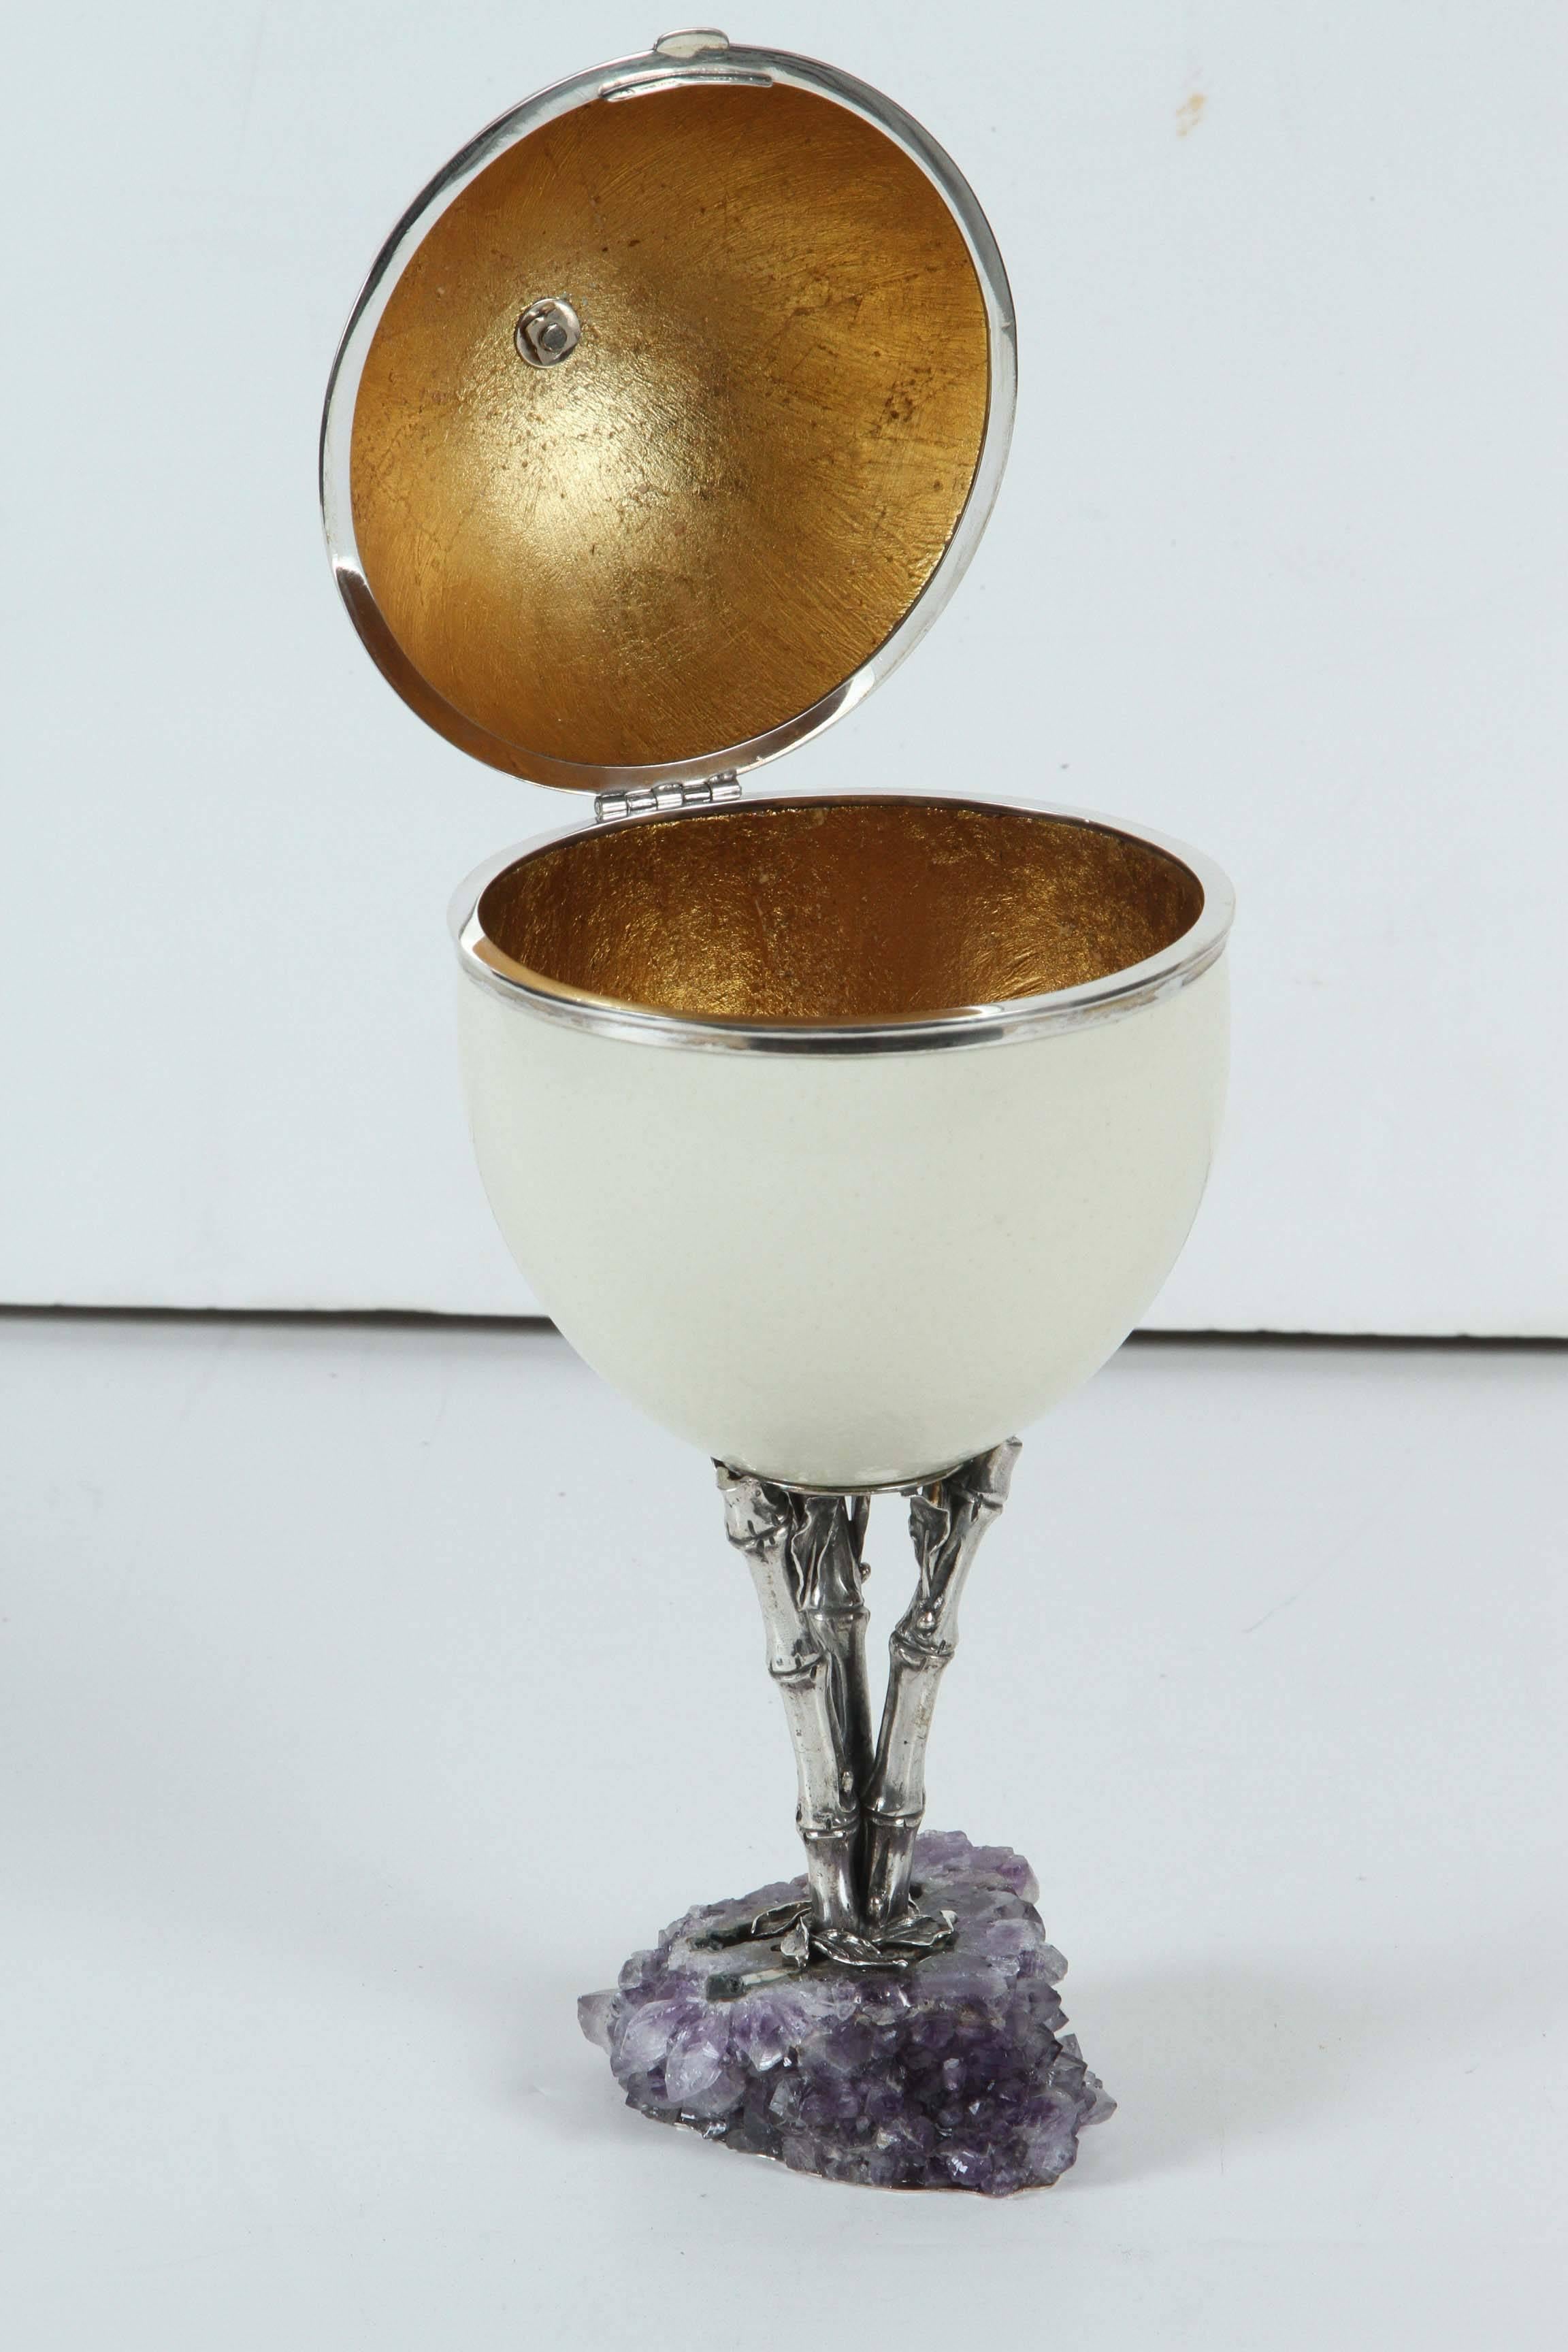 Large, hand decorated ostrich egg container featuring a gilded interior. The whole mounted on a sterling silver pedestal with a multifaceted, amethyst crystal base.